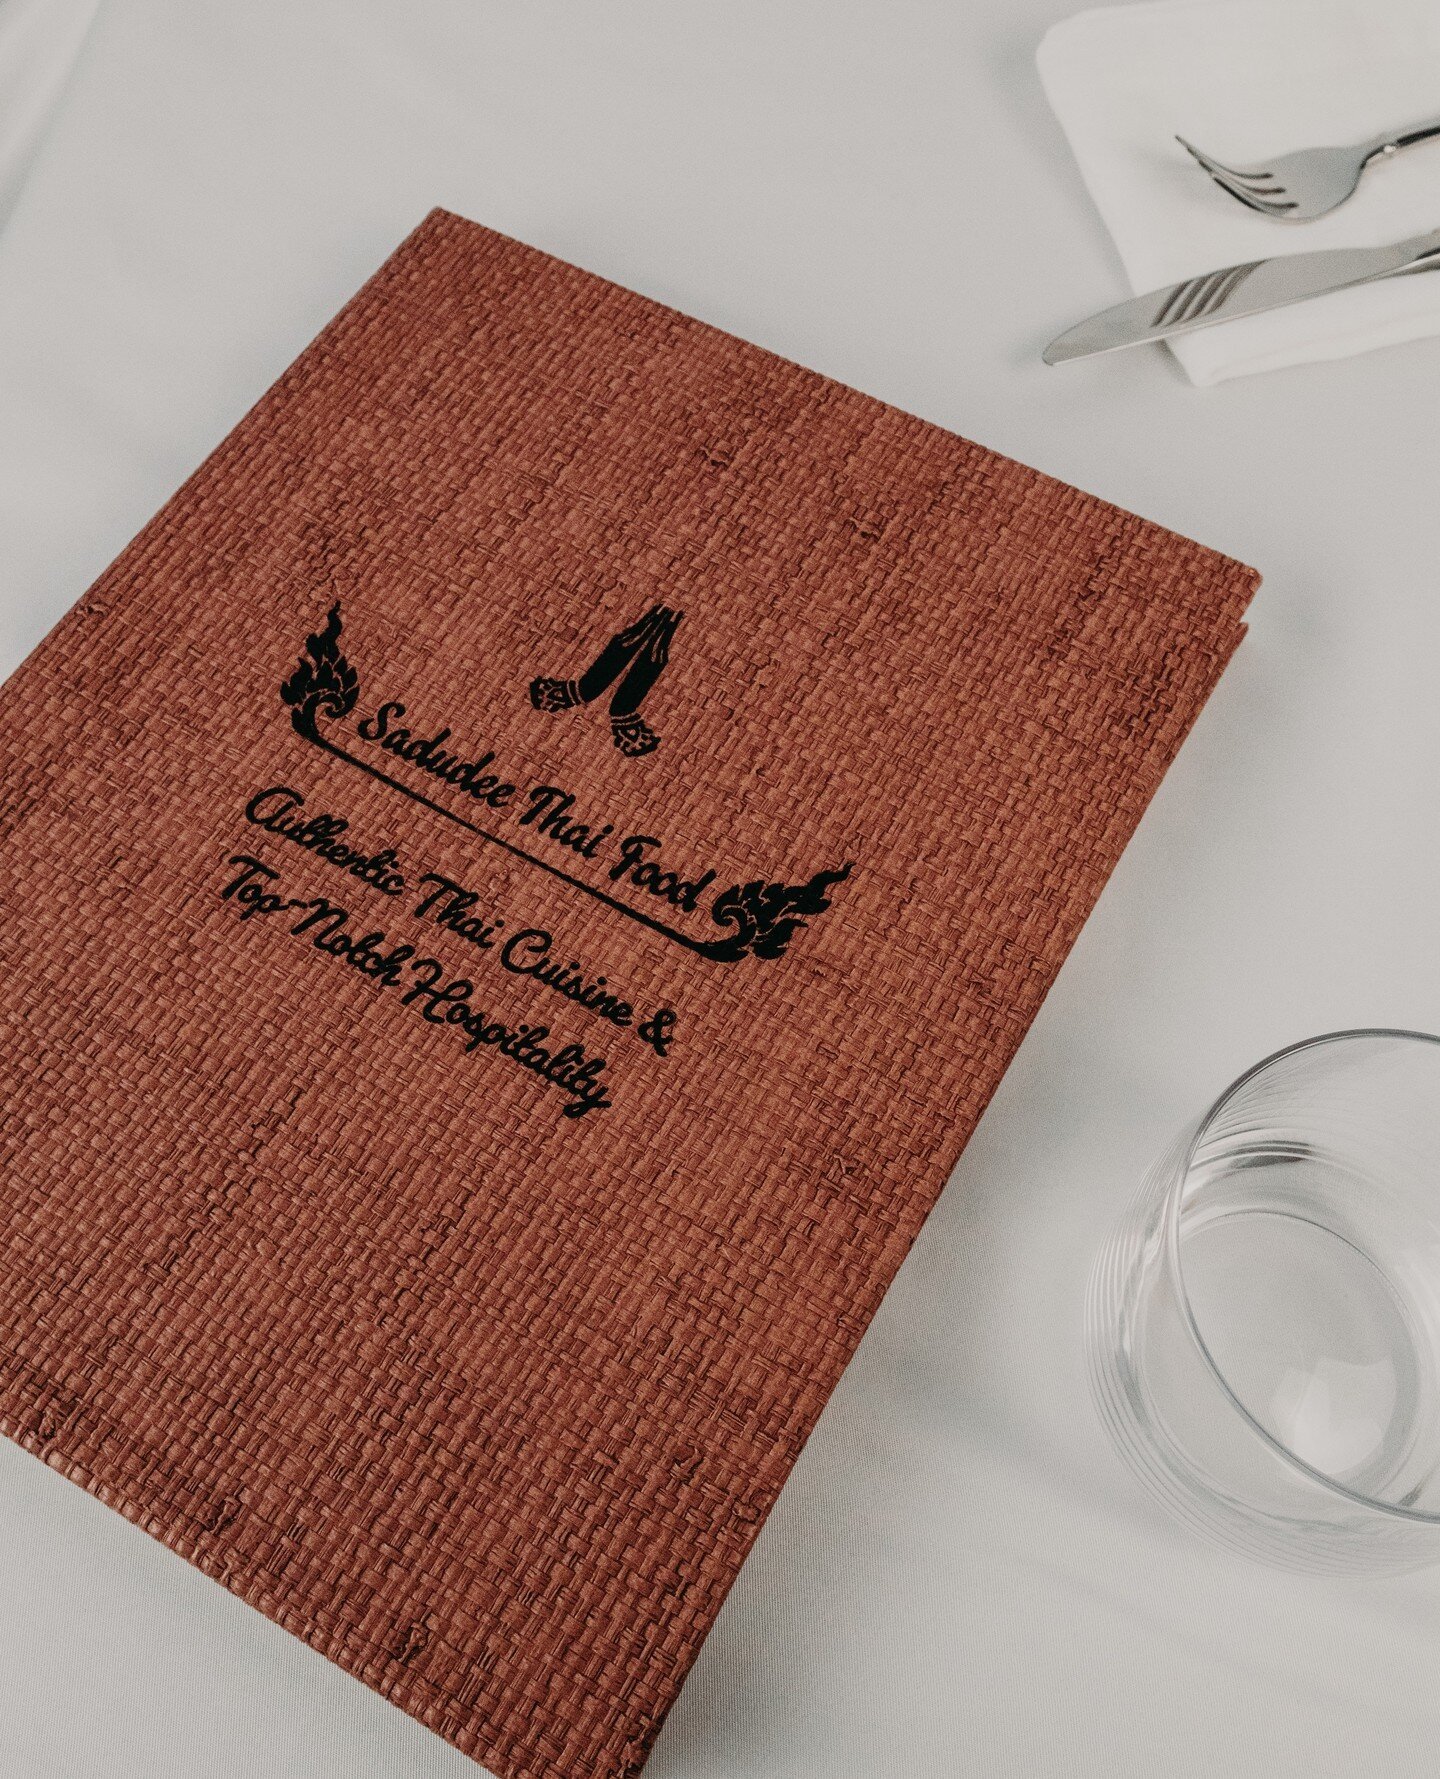 At Risch, we have a large selection of menu covers available to choose from. Our menus are crafted with detail and care using quality material, like this Rattan cover, which reflects the dedication we invest in each piece.⁠
-⁠
⁠
⁠
#coffee #wine #plan